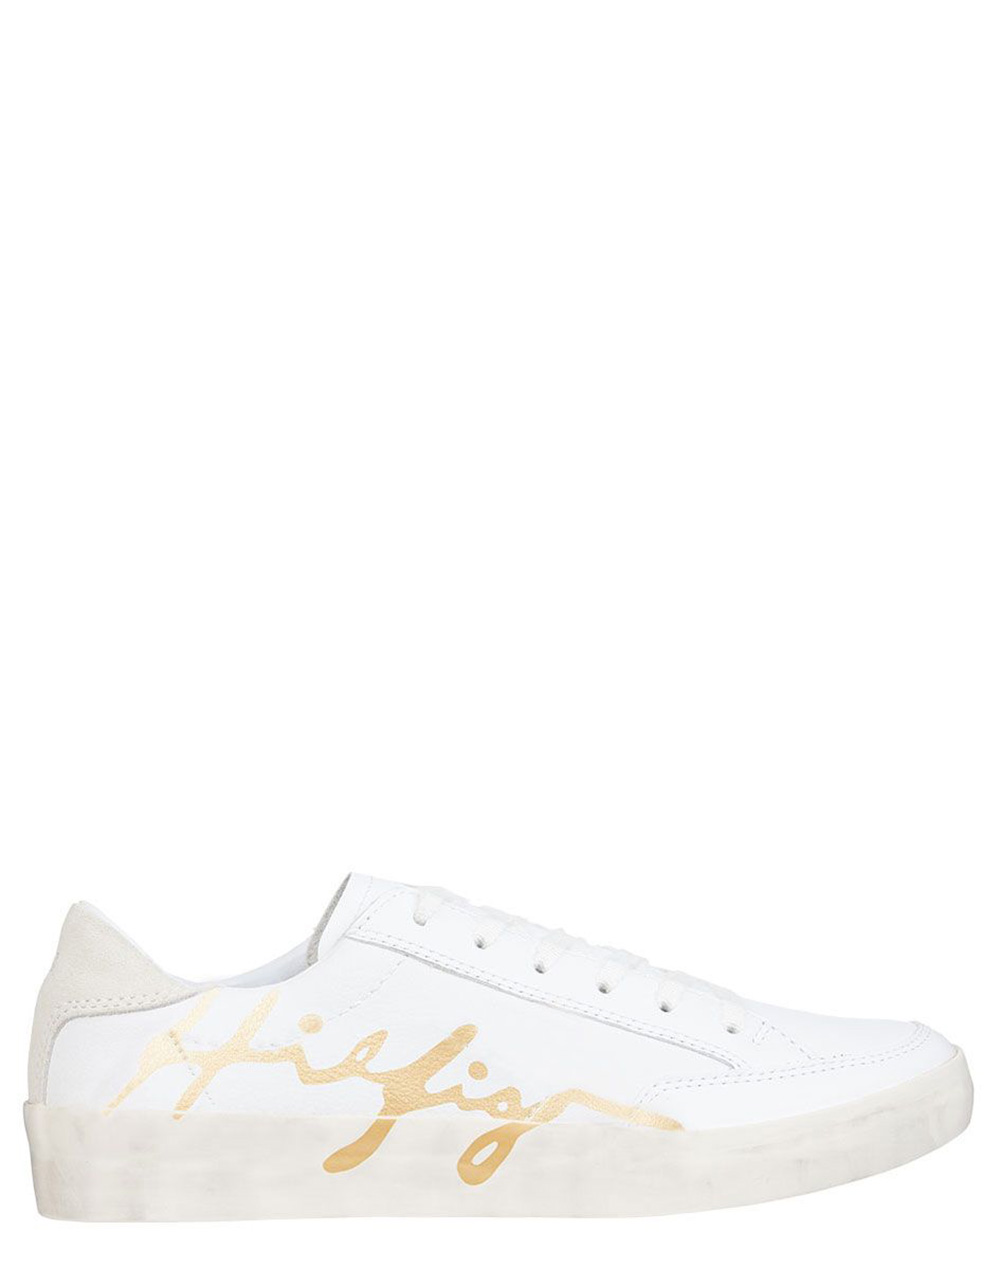 TOMMY HILFIGER TH SIGNATURE LEATHER SNEAKERS FW0FW05701-YBR White